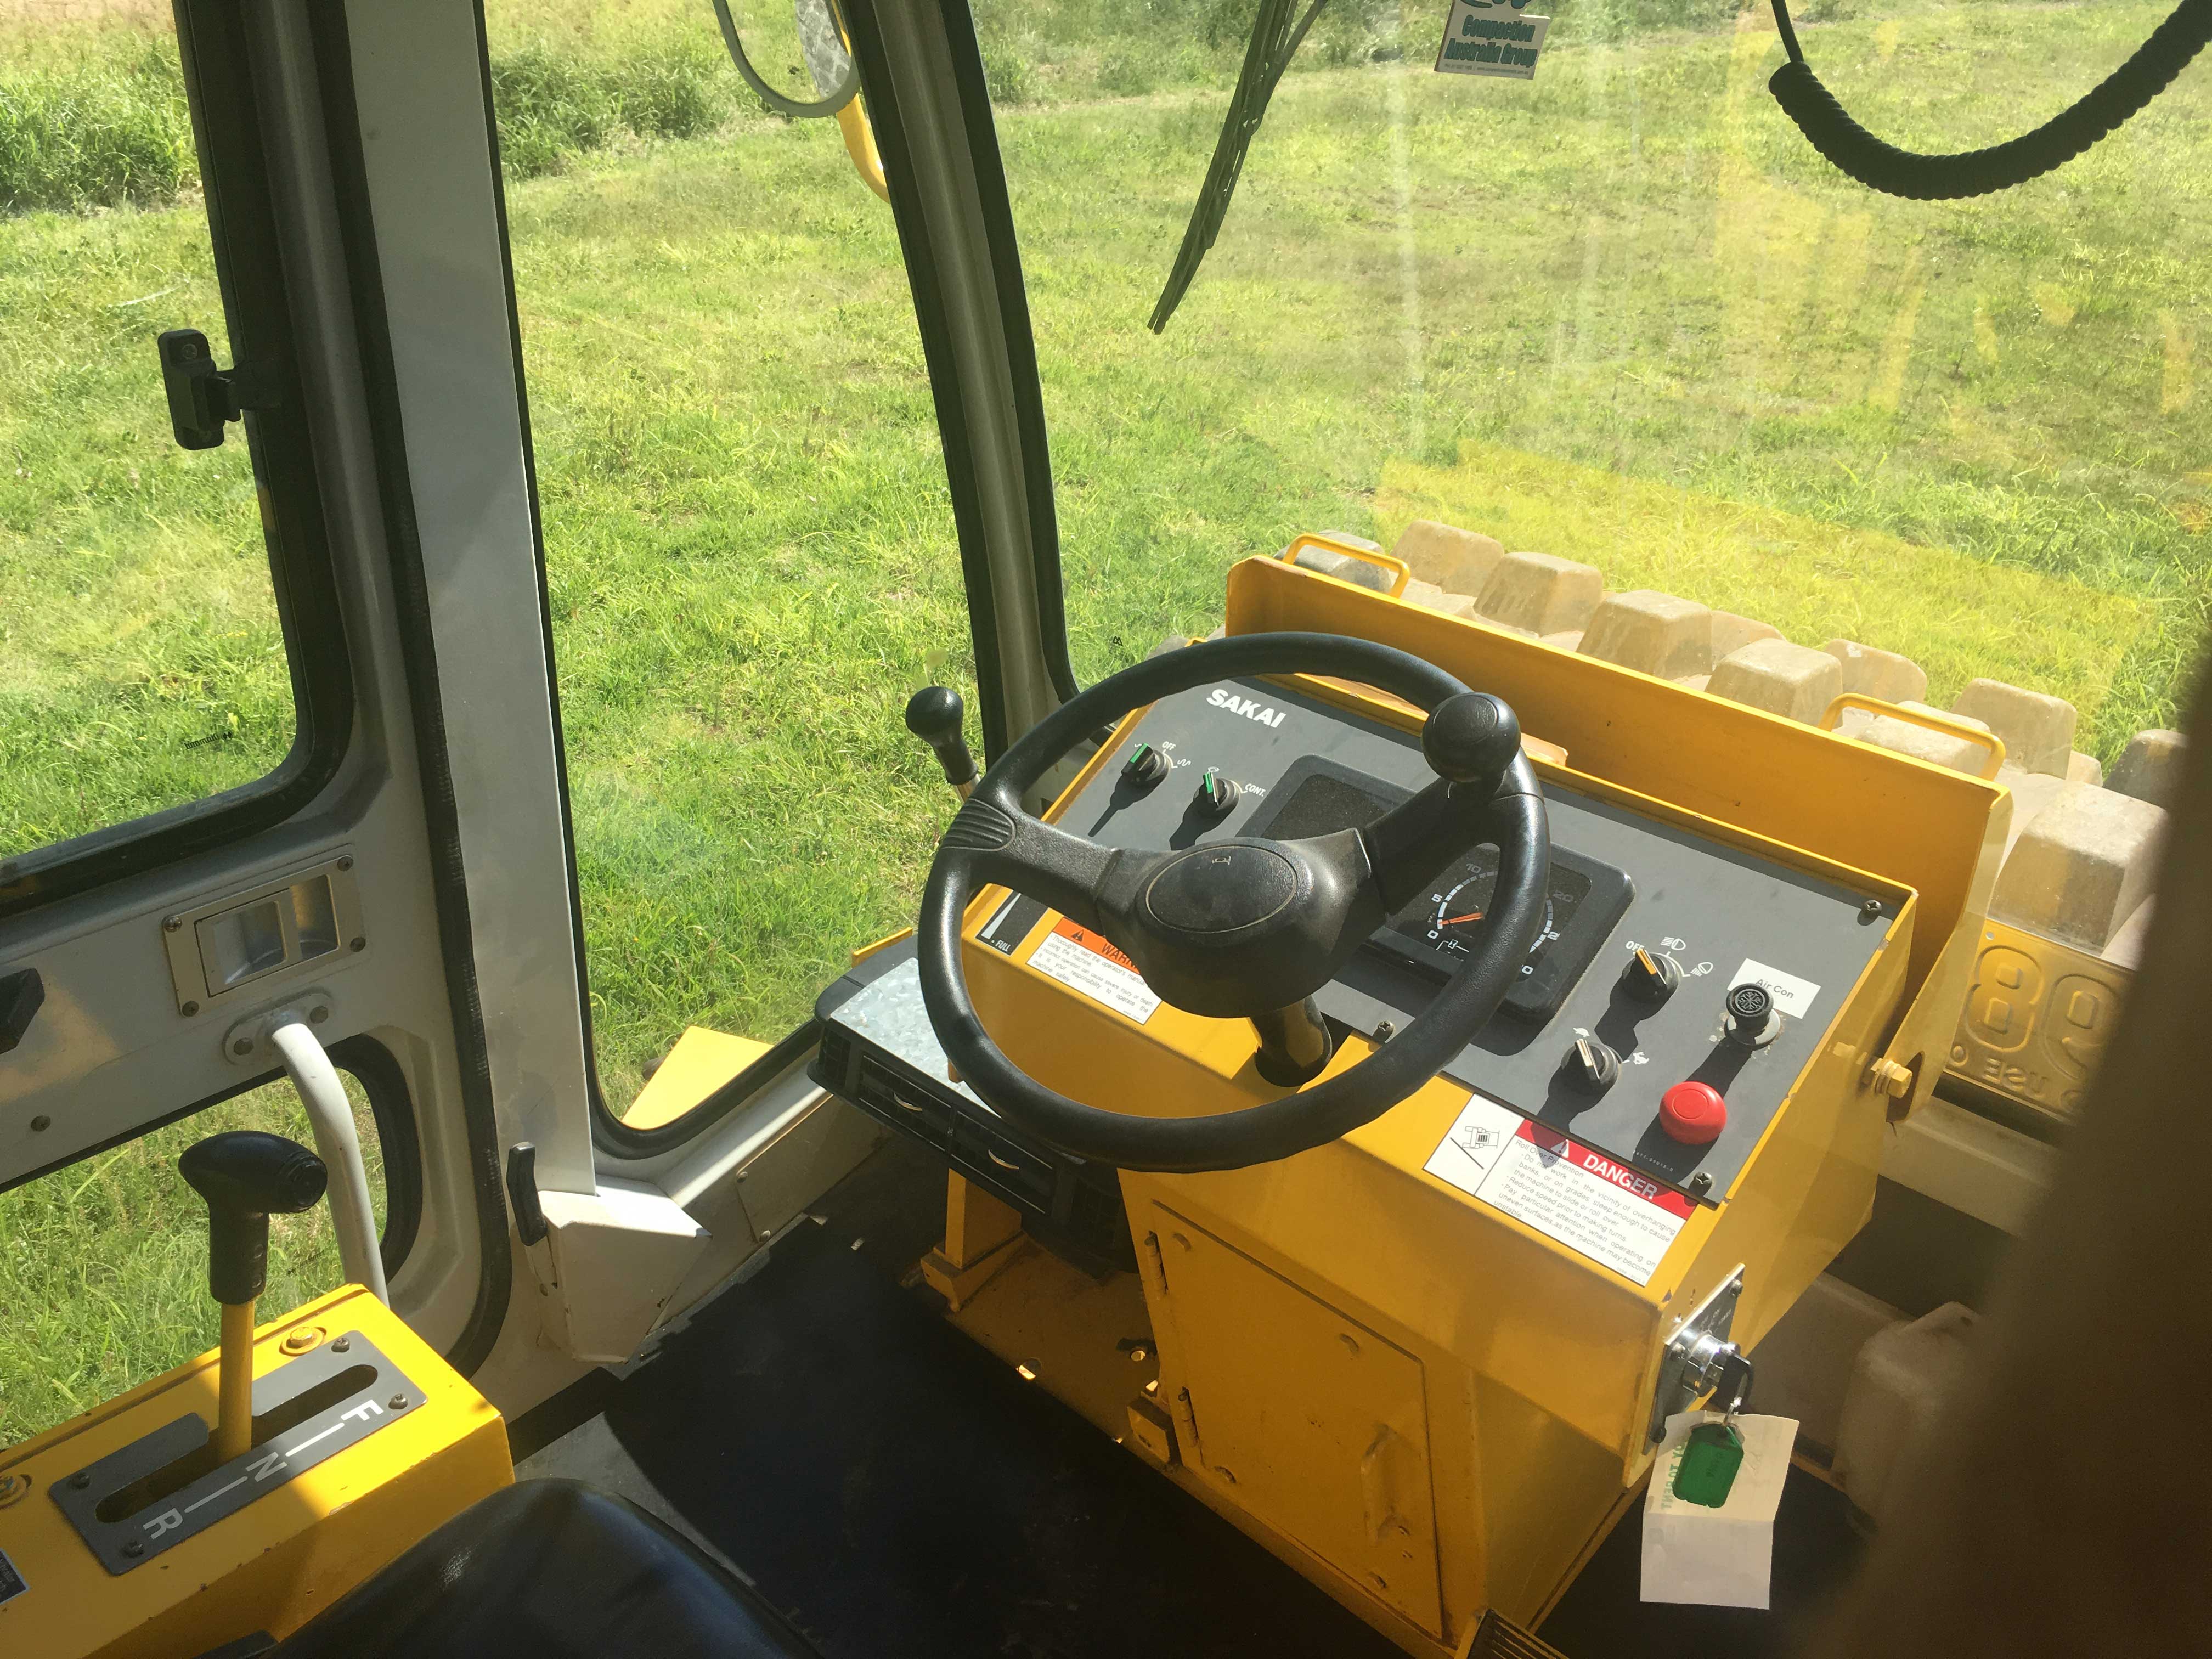 Inside the cab of the Sakai SV512TF padfoot roller